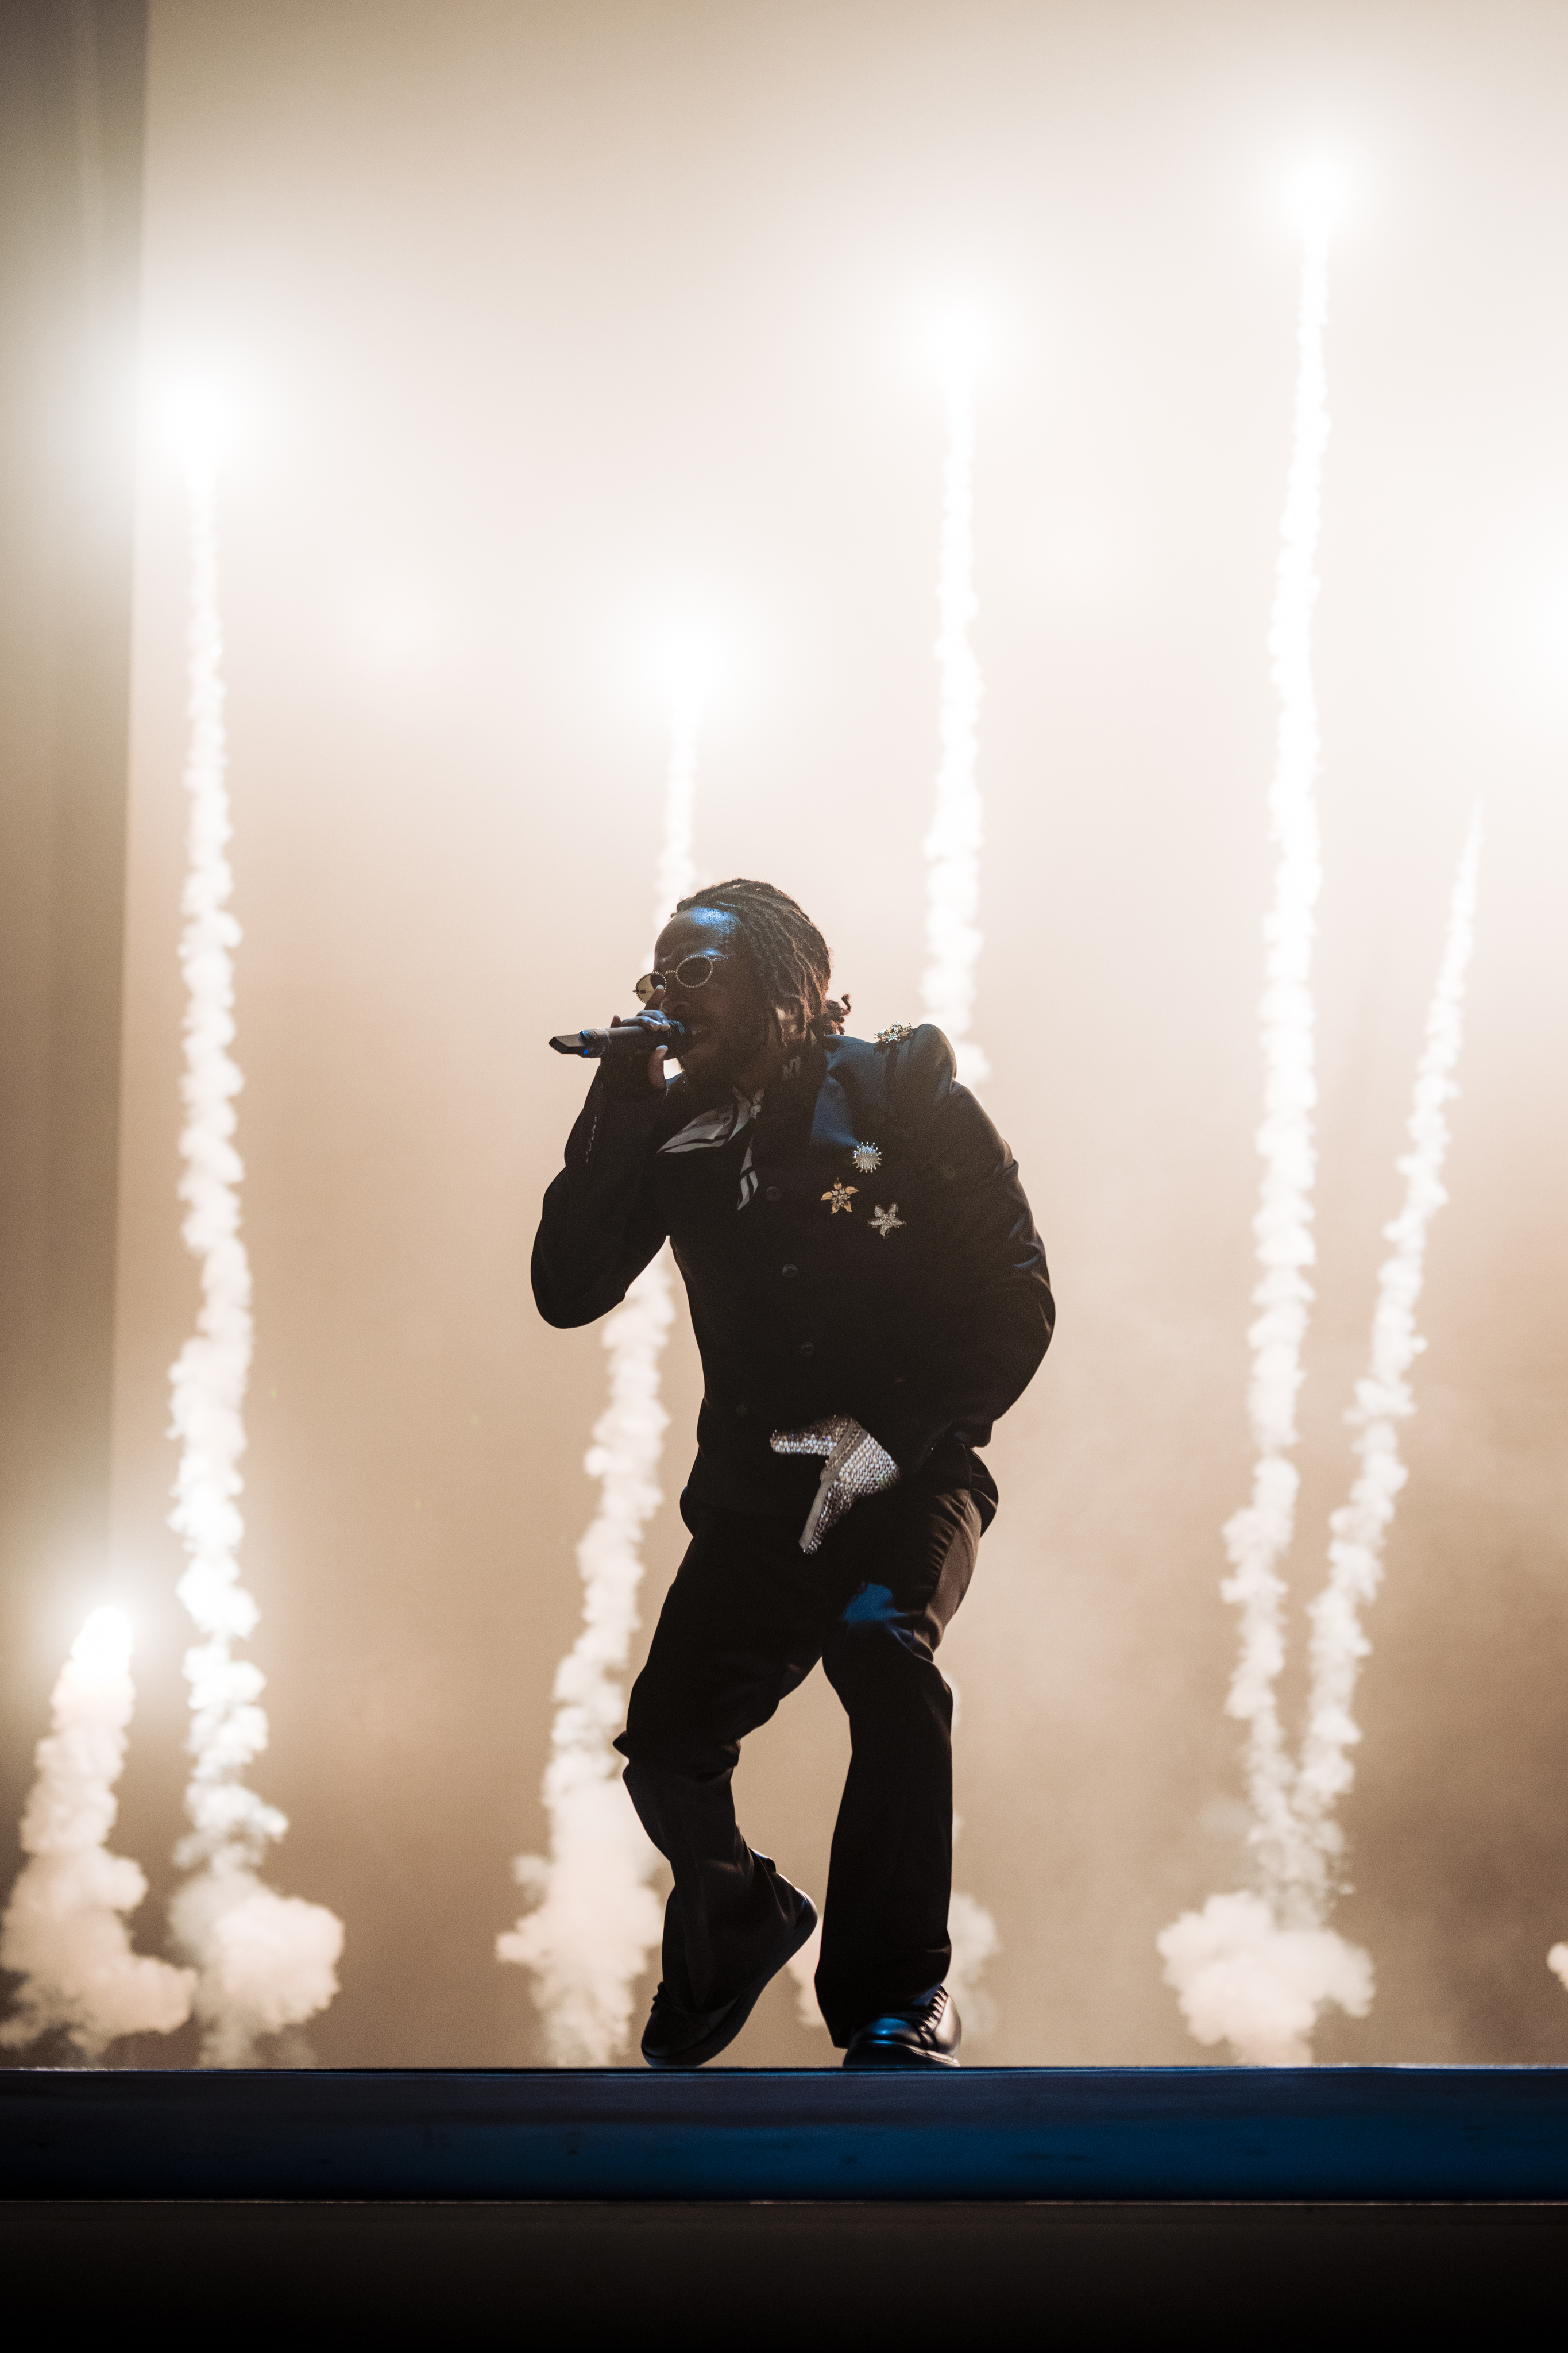 Kendrick Lamar's latest efforts crystallize with classics at